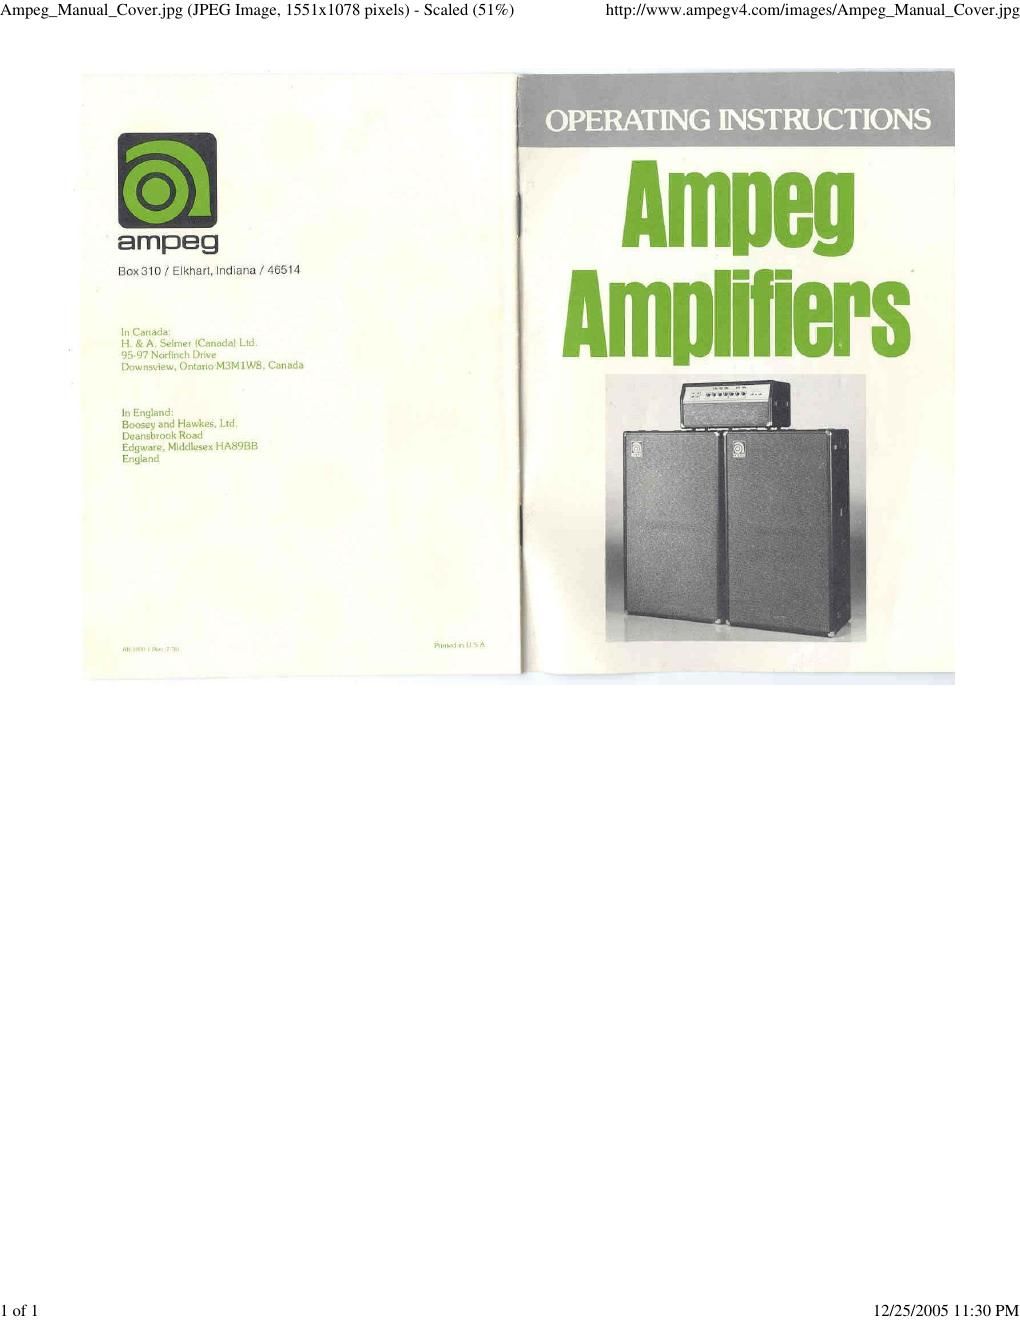 ampeg amplifiers operating manual